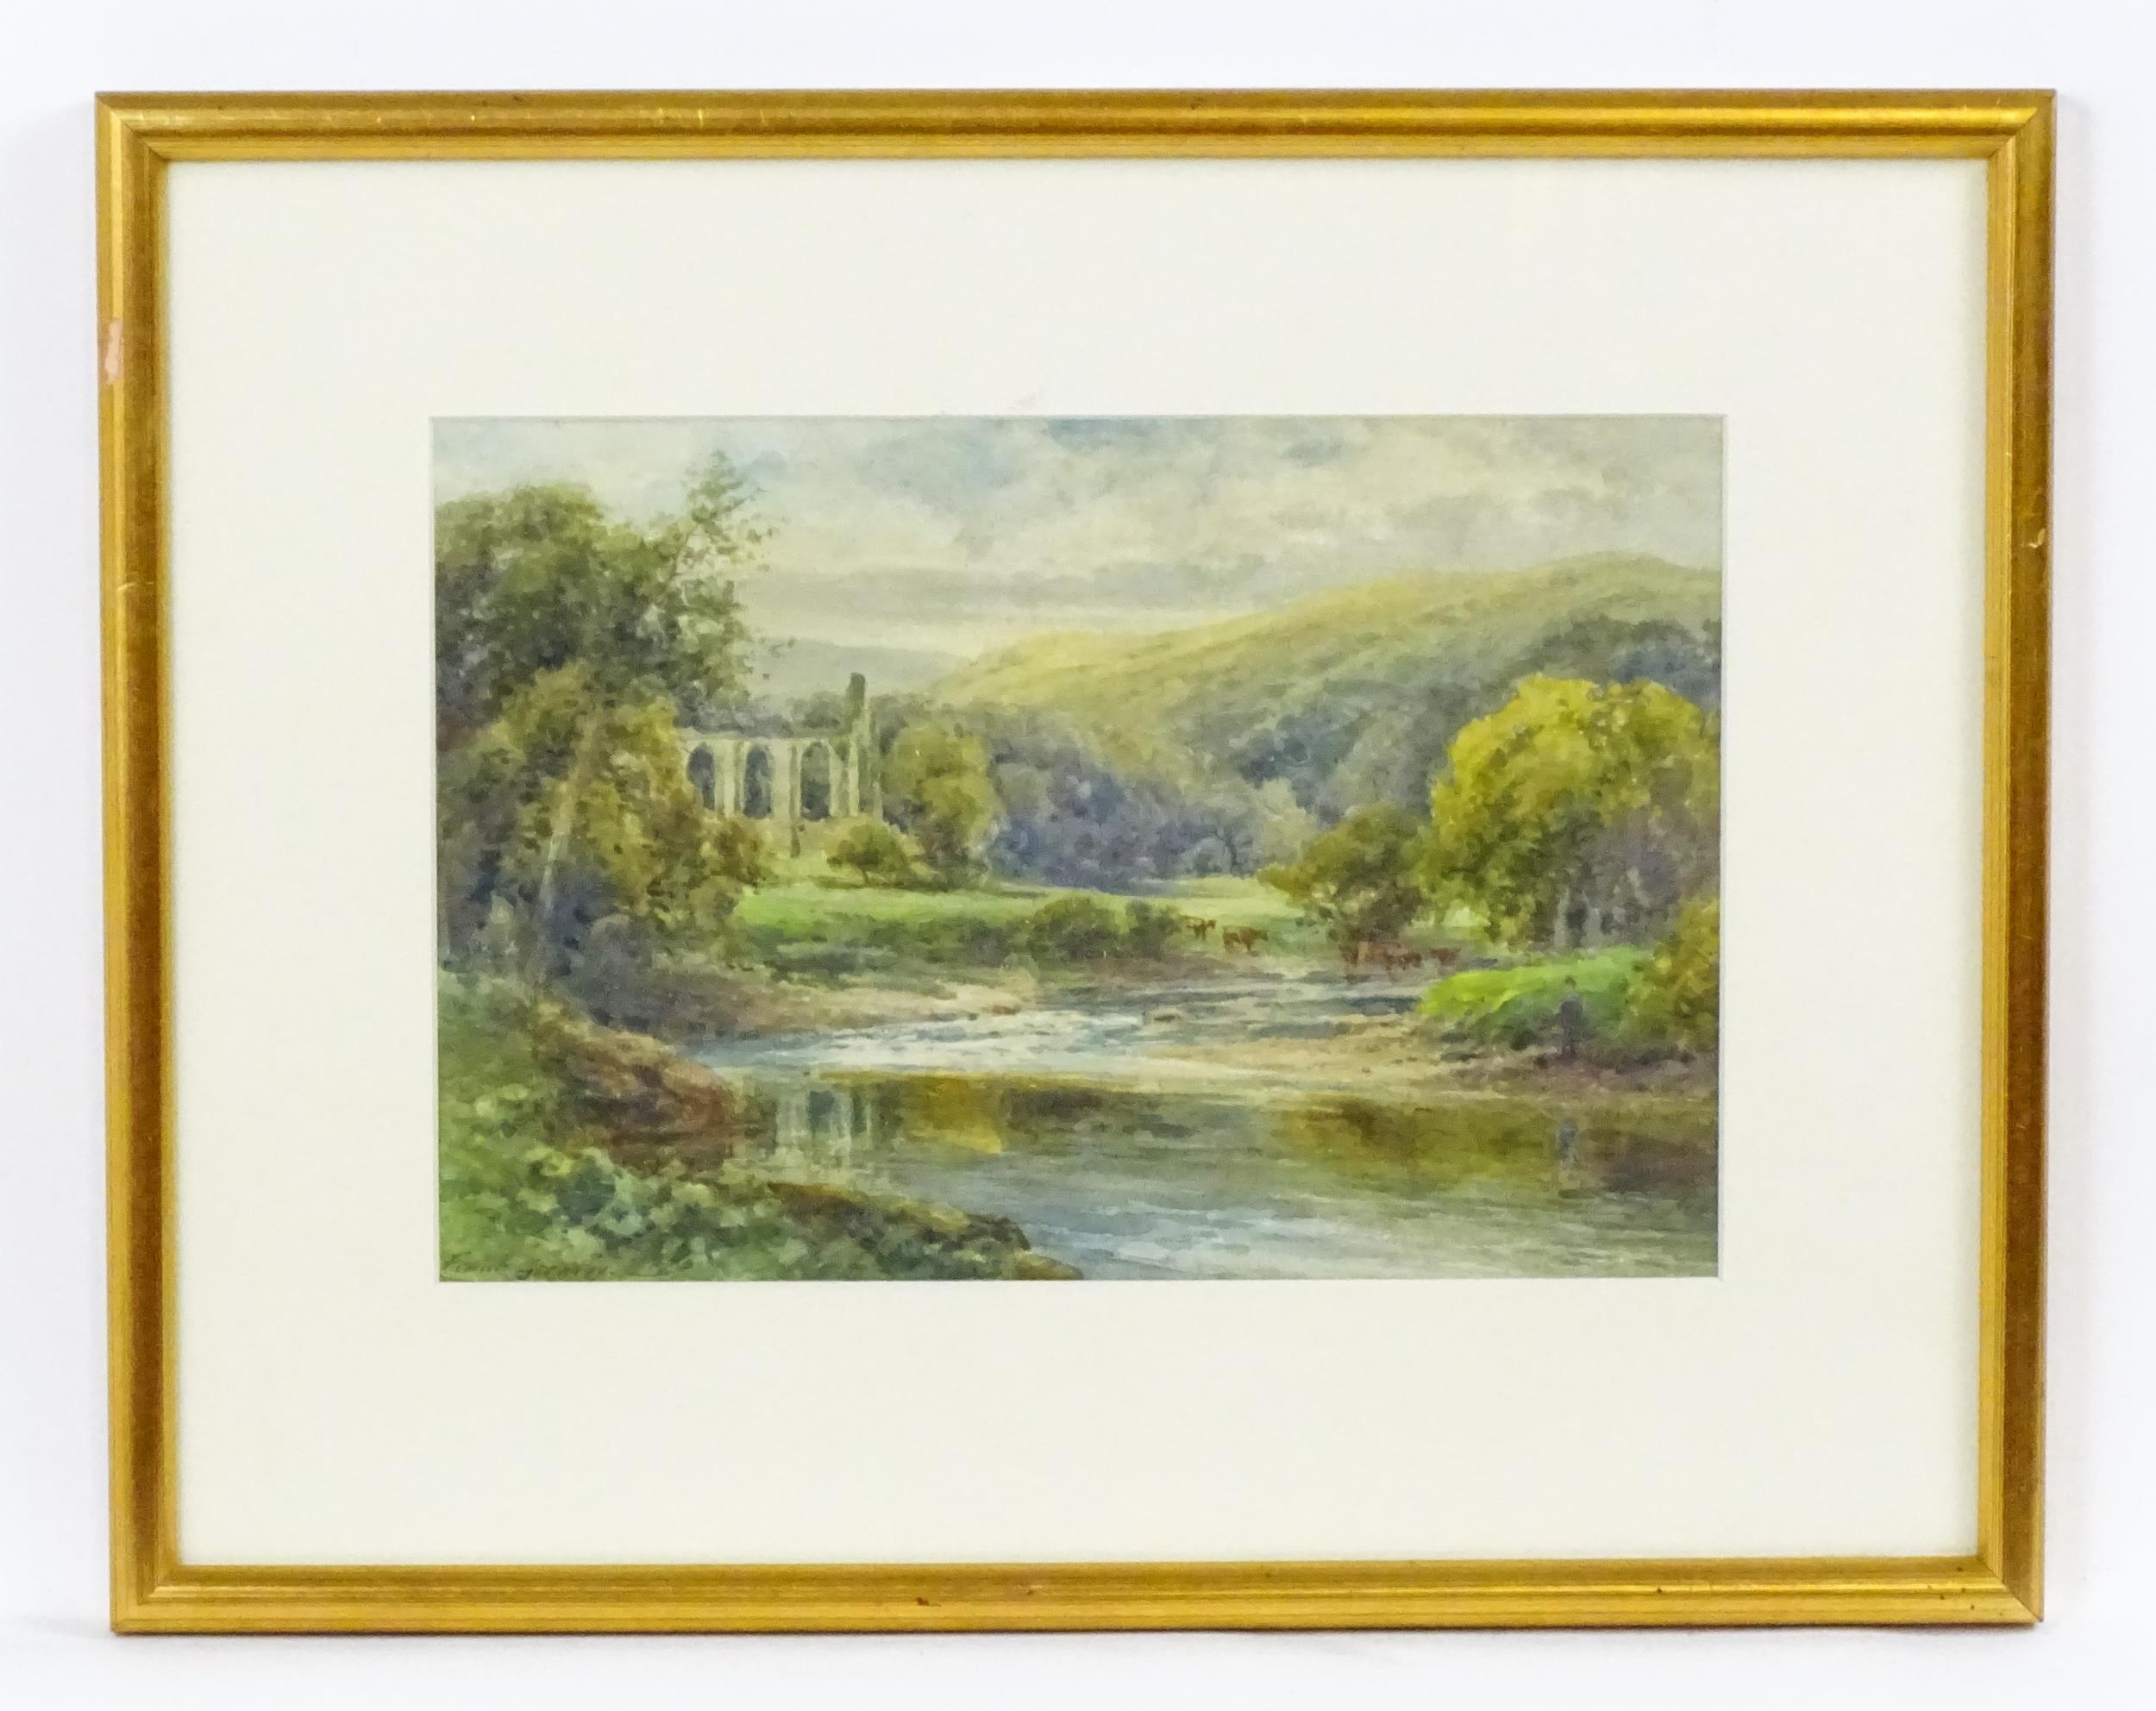 Frank Gresley (1855-1936), Watercolour, Bolton Abbey, A Yorkshire Dales river landscape with